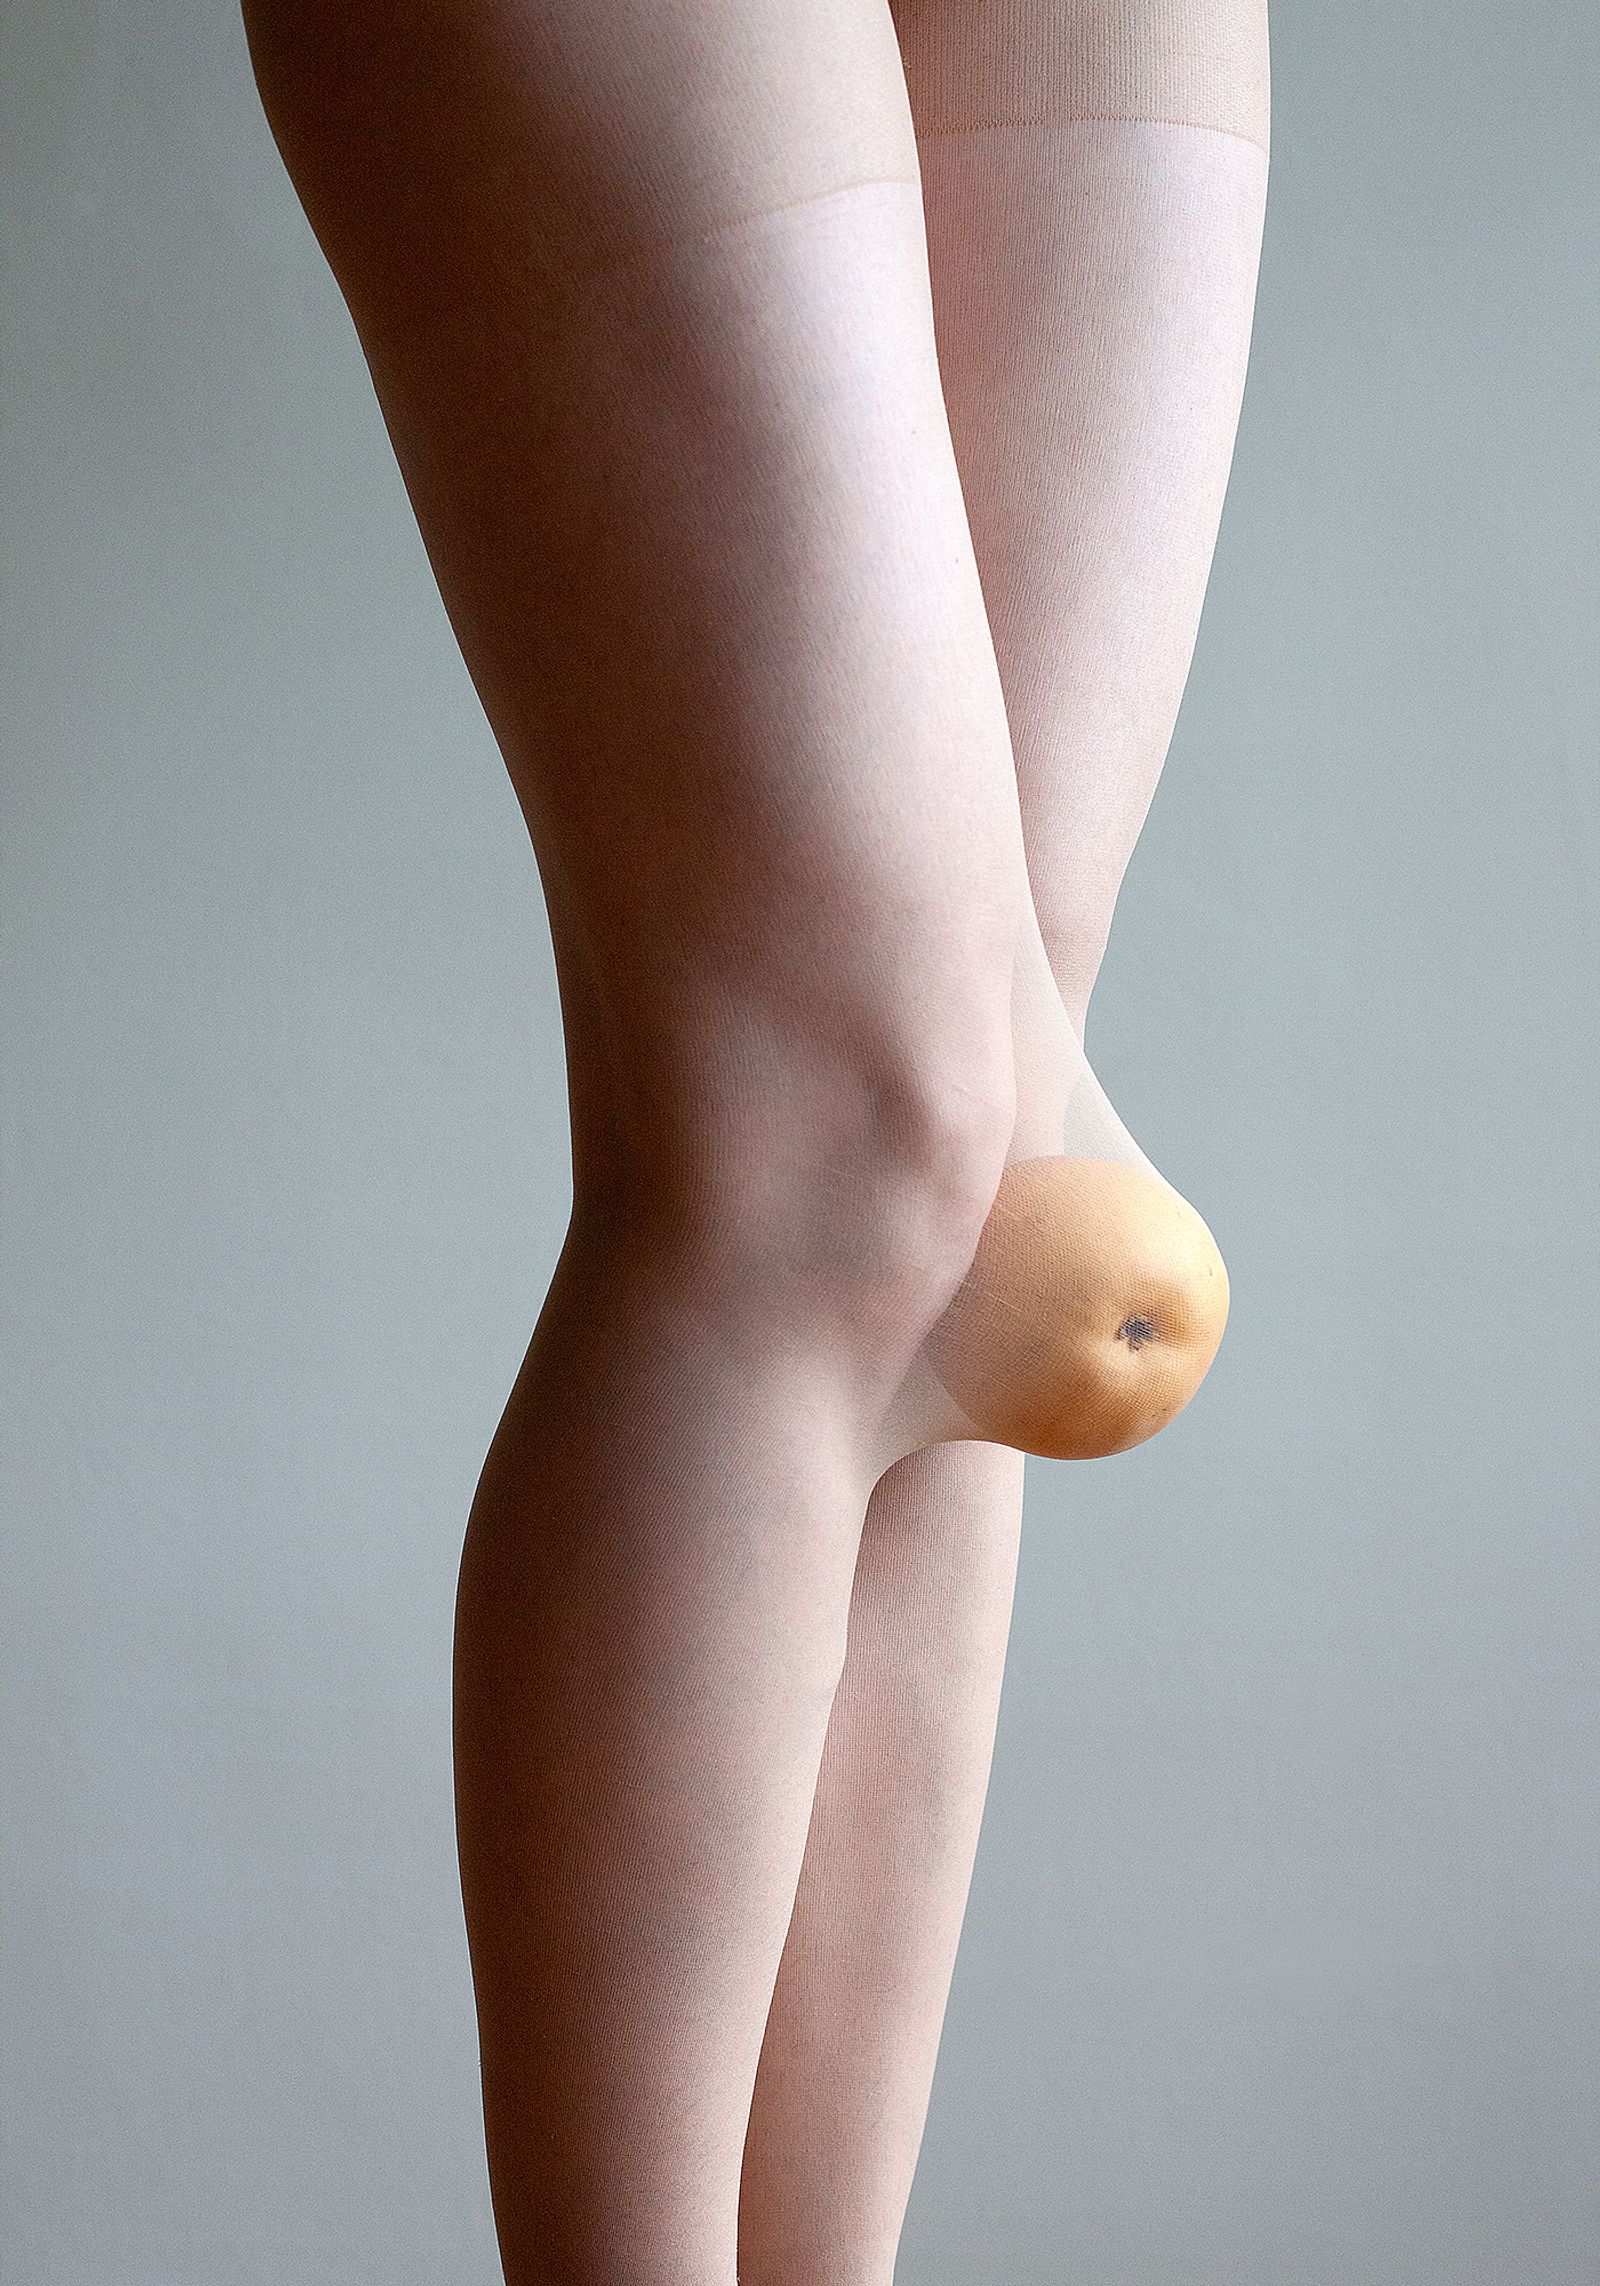 © Birthe Piontek - Image from the Janus photography project